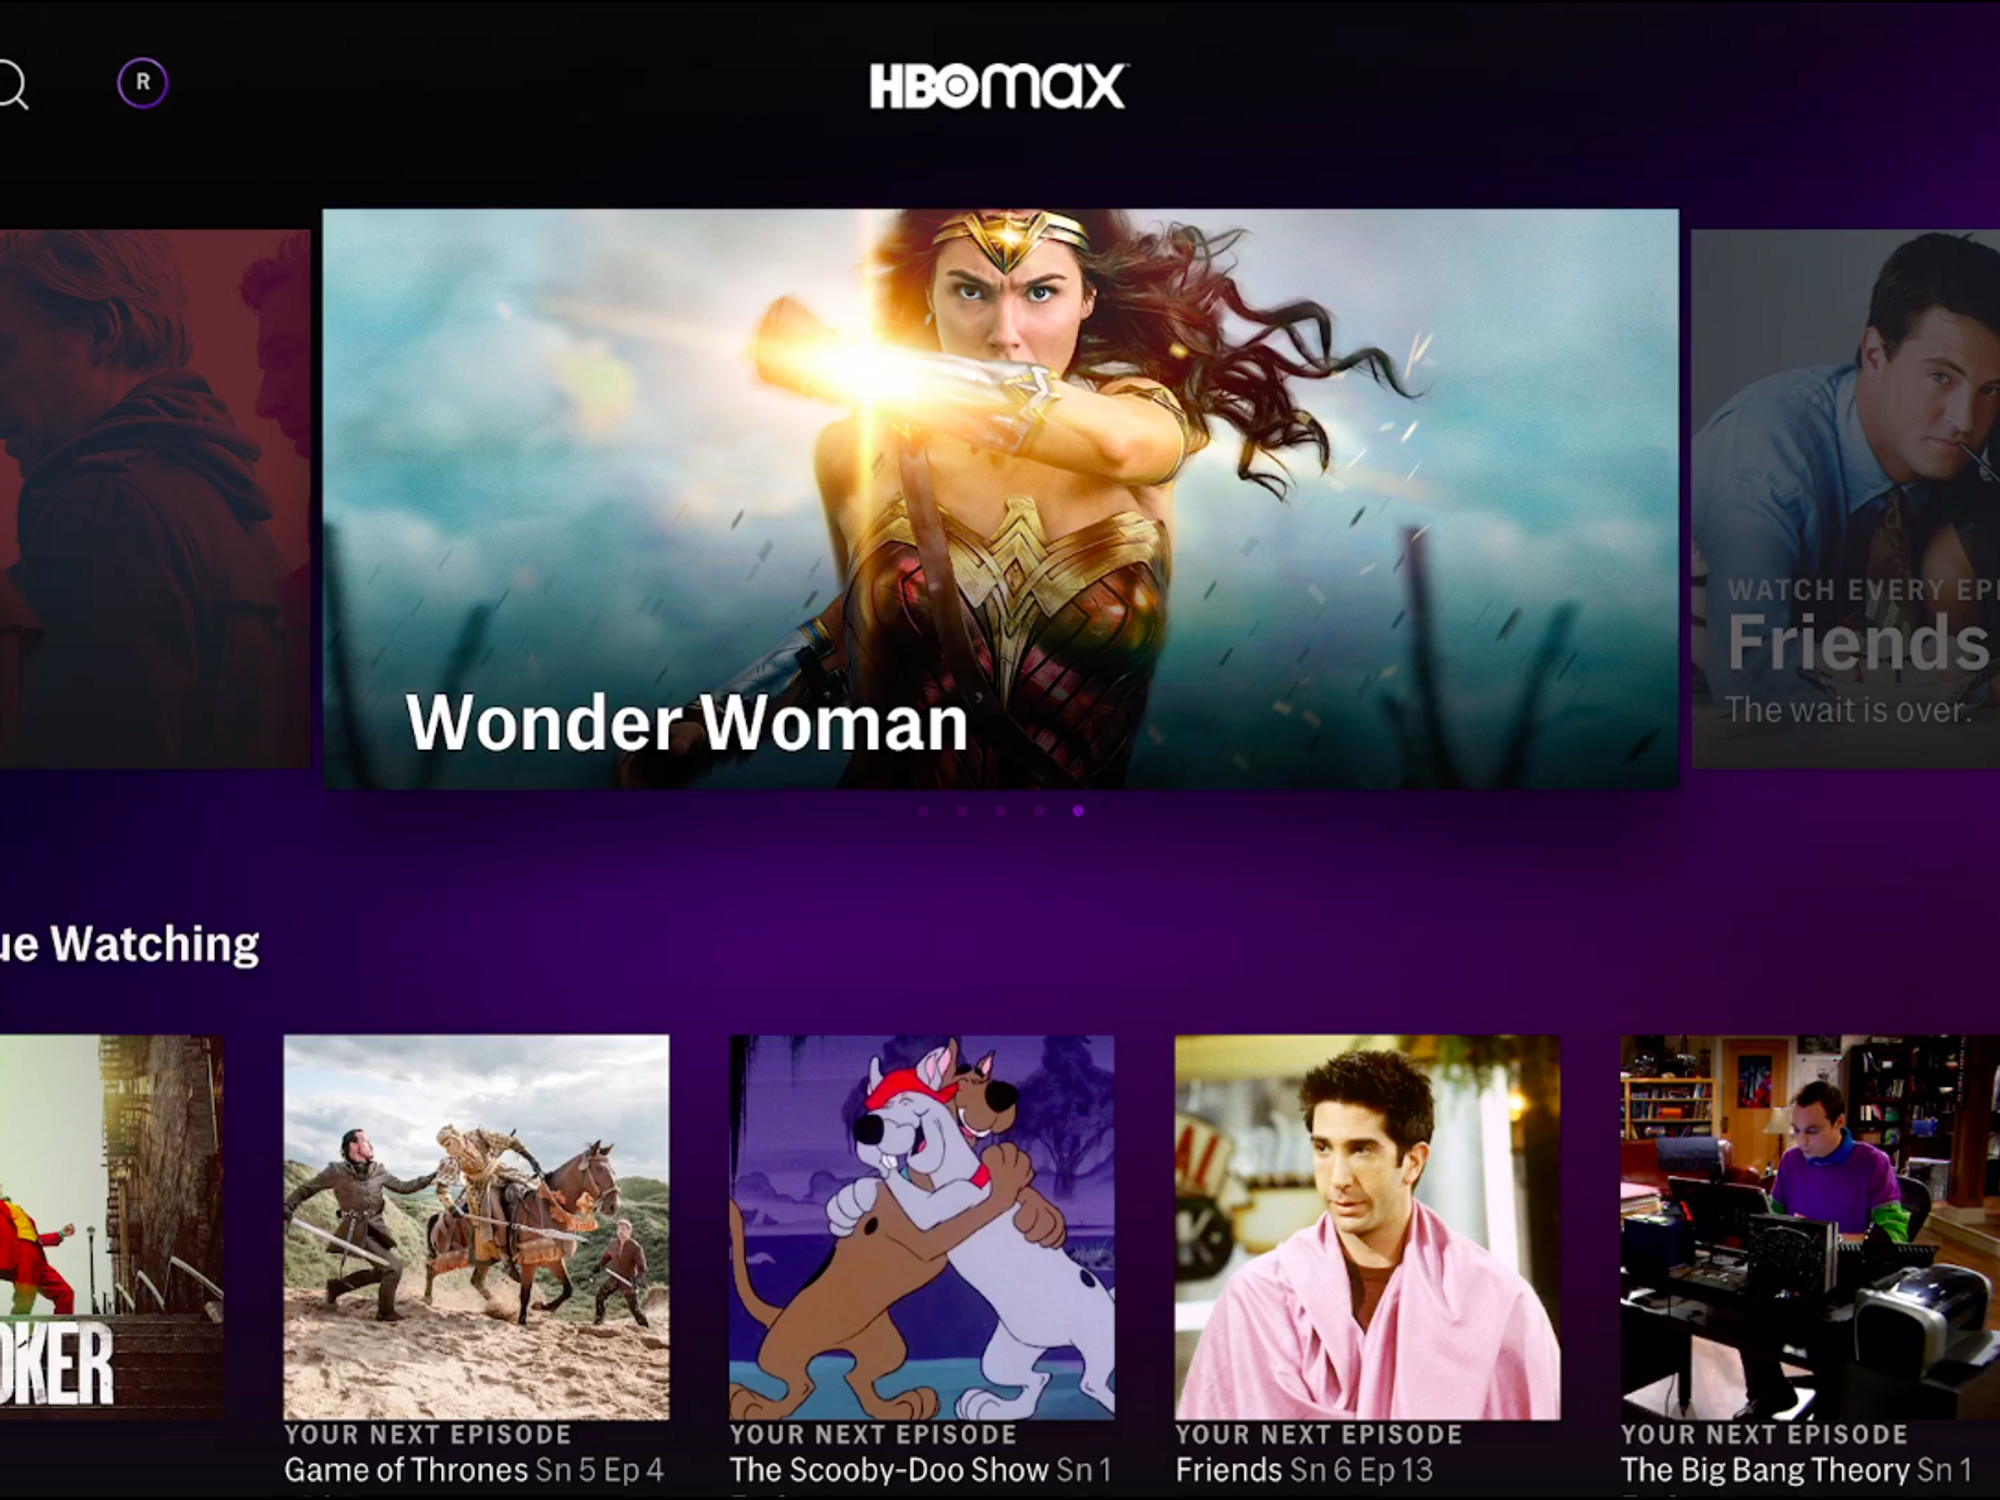 You'll Soon Be Able to Get a Cheaper, Ad-Supported Version of HBO Max